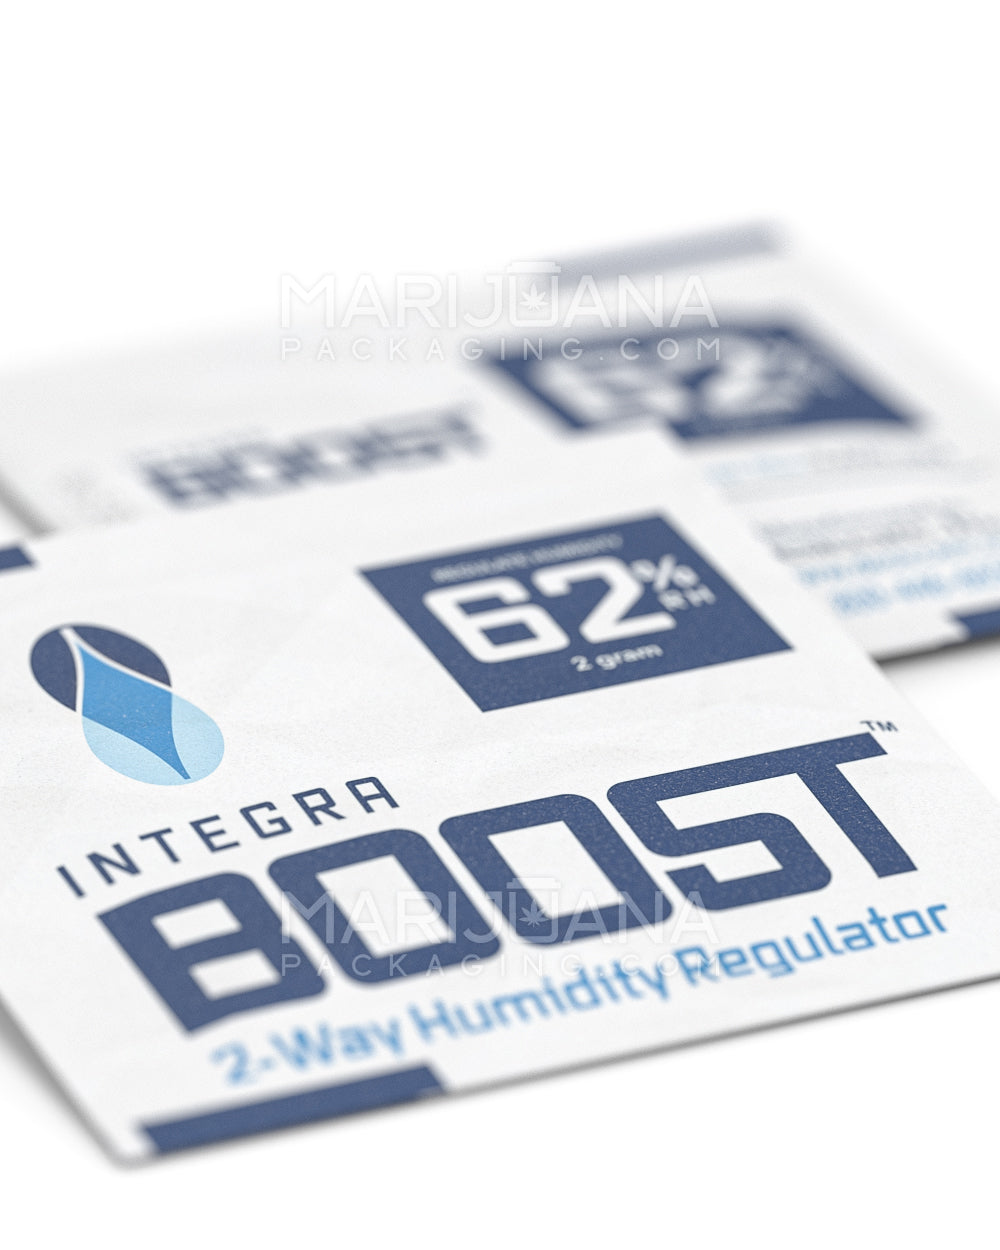 INTEGRA | Boost Humidity Pack | 2 Grams - 62% - 100 Count - 4